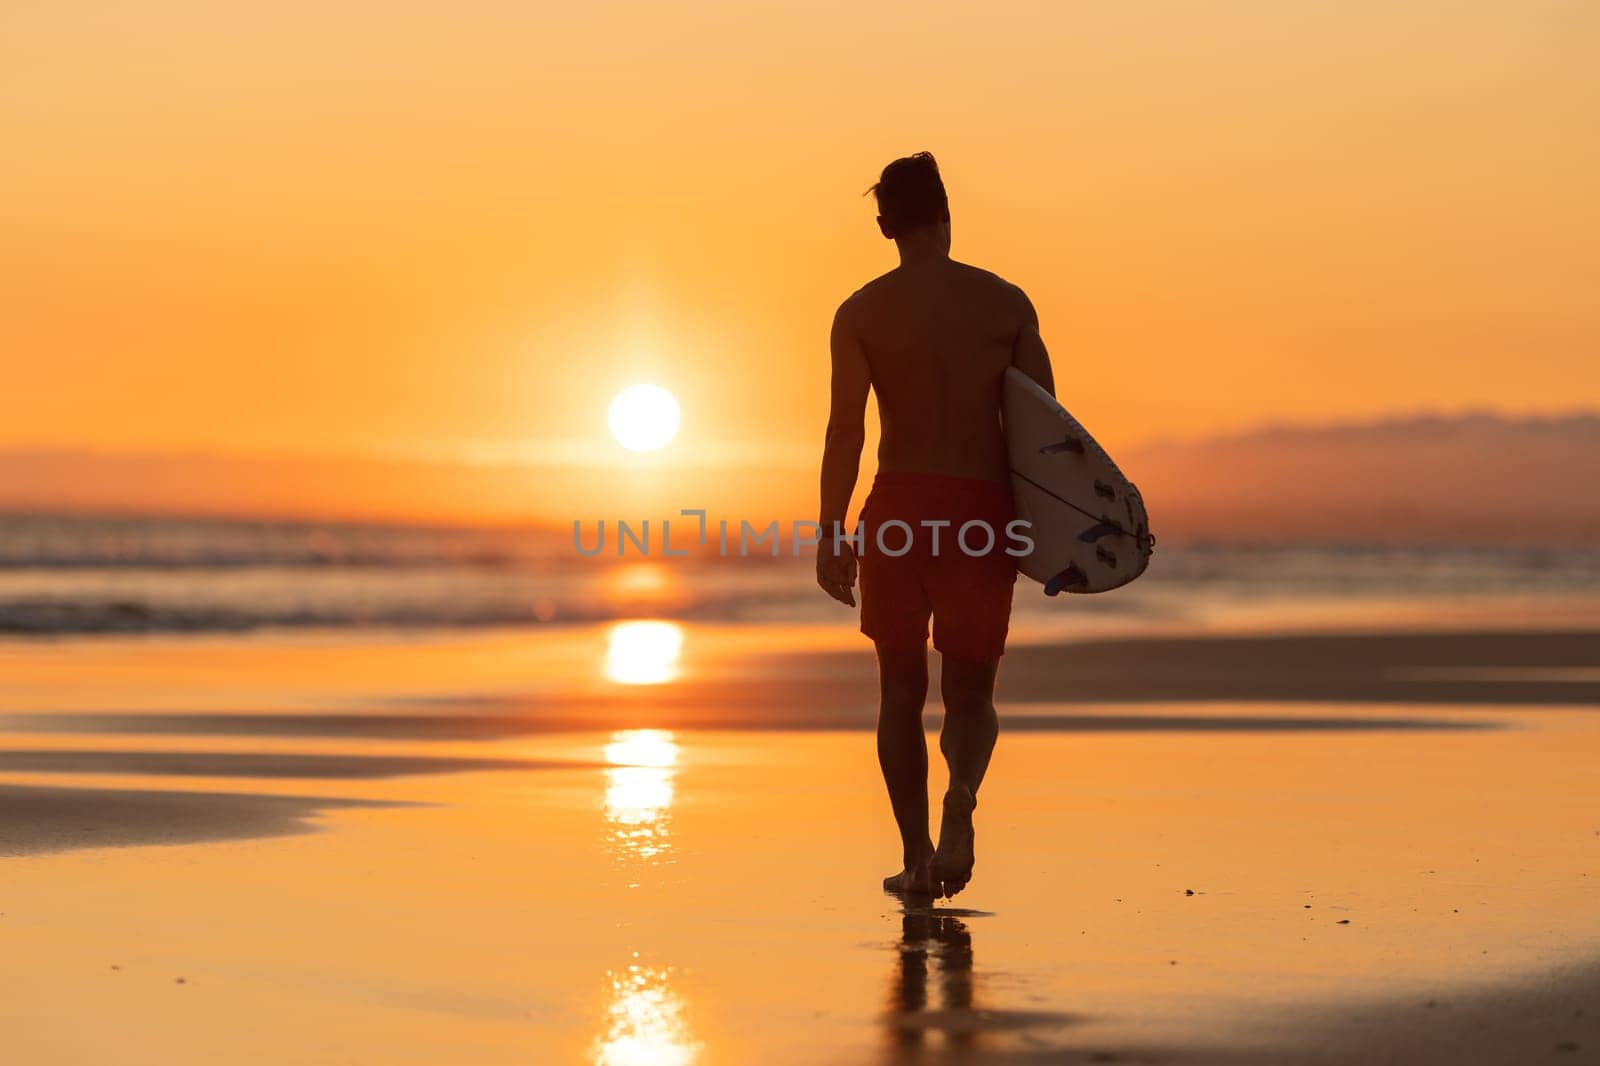 Black silhouette of an attractive man walking on the shore holding a surfboard at orange sunset by Studia72